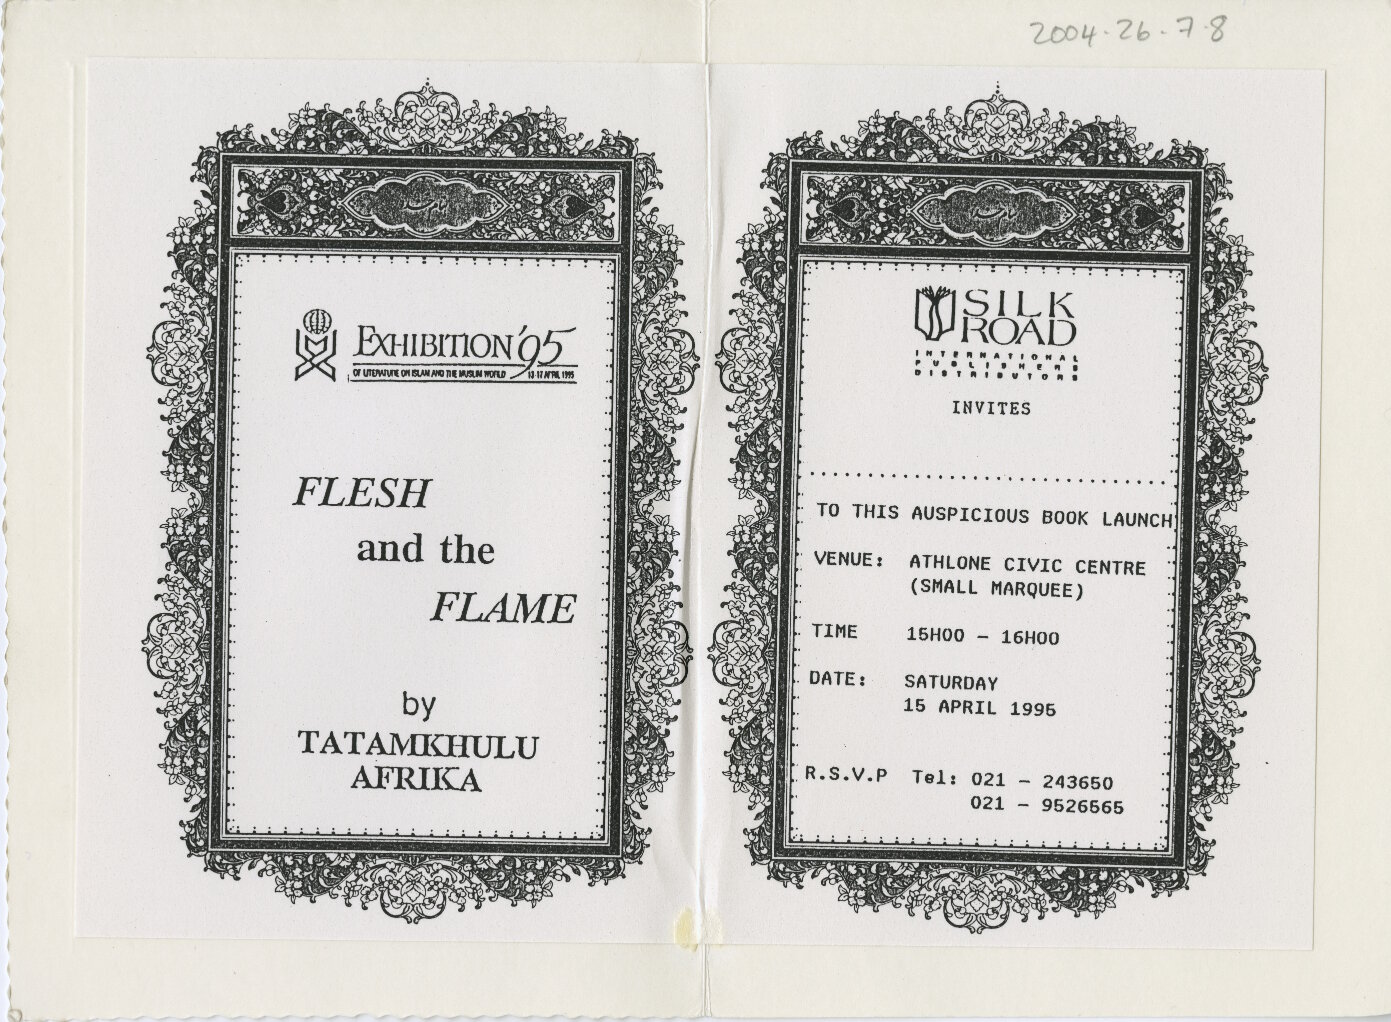 The title poem for the collection <em>Flesh and the Flame</em> reveals a mystical view of being. The book was launched at the Athlone Civic Centre in April 1995. 